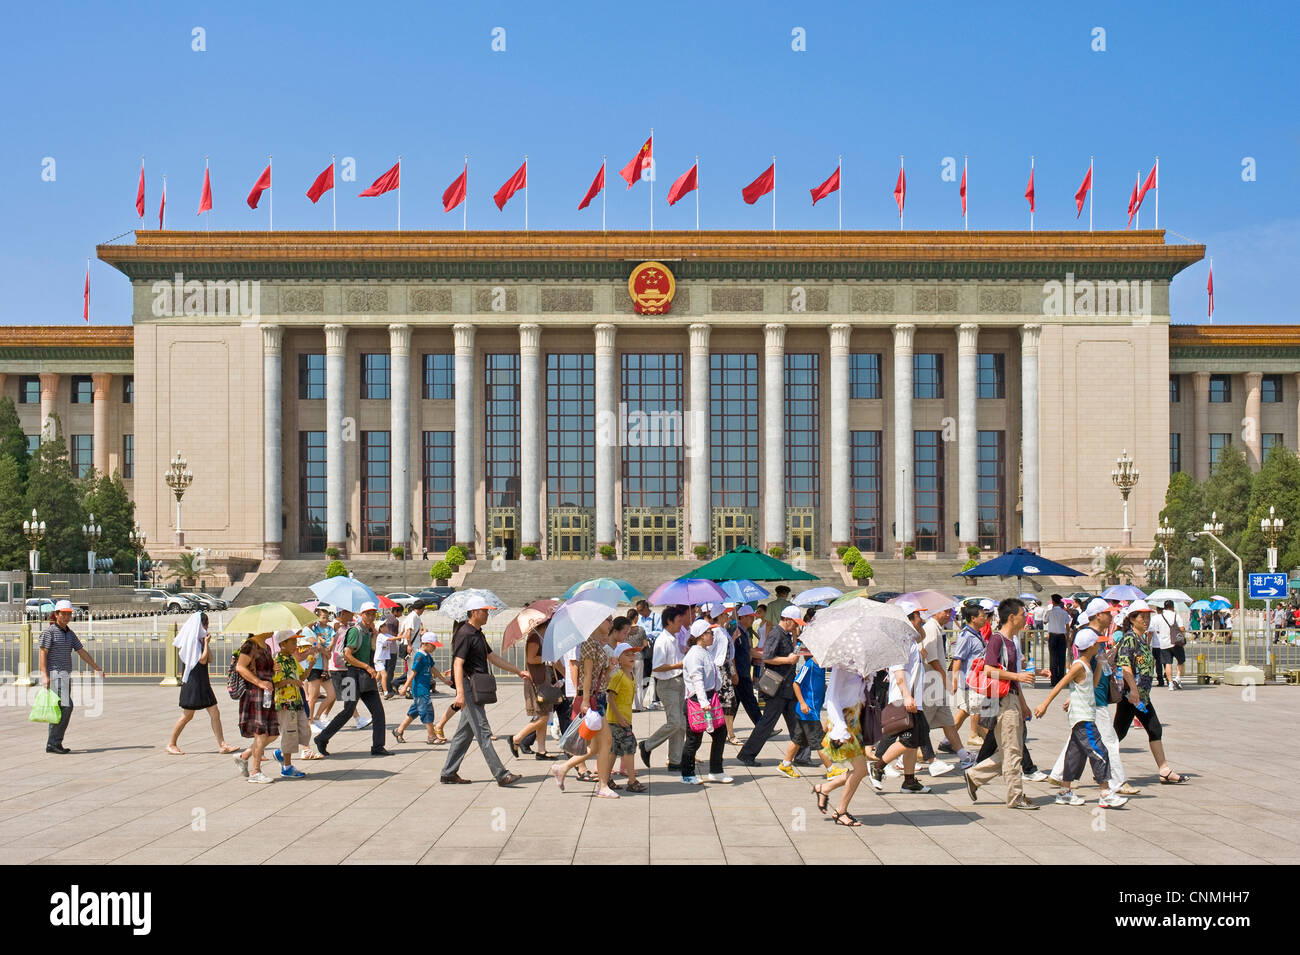 Chinese tourists in Tiananmen Square with The Great Hall of the People in the background. Stock Photo